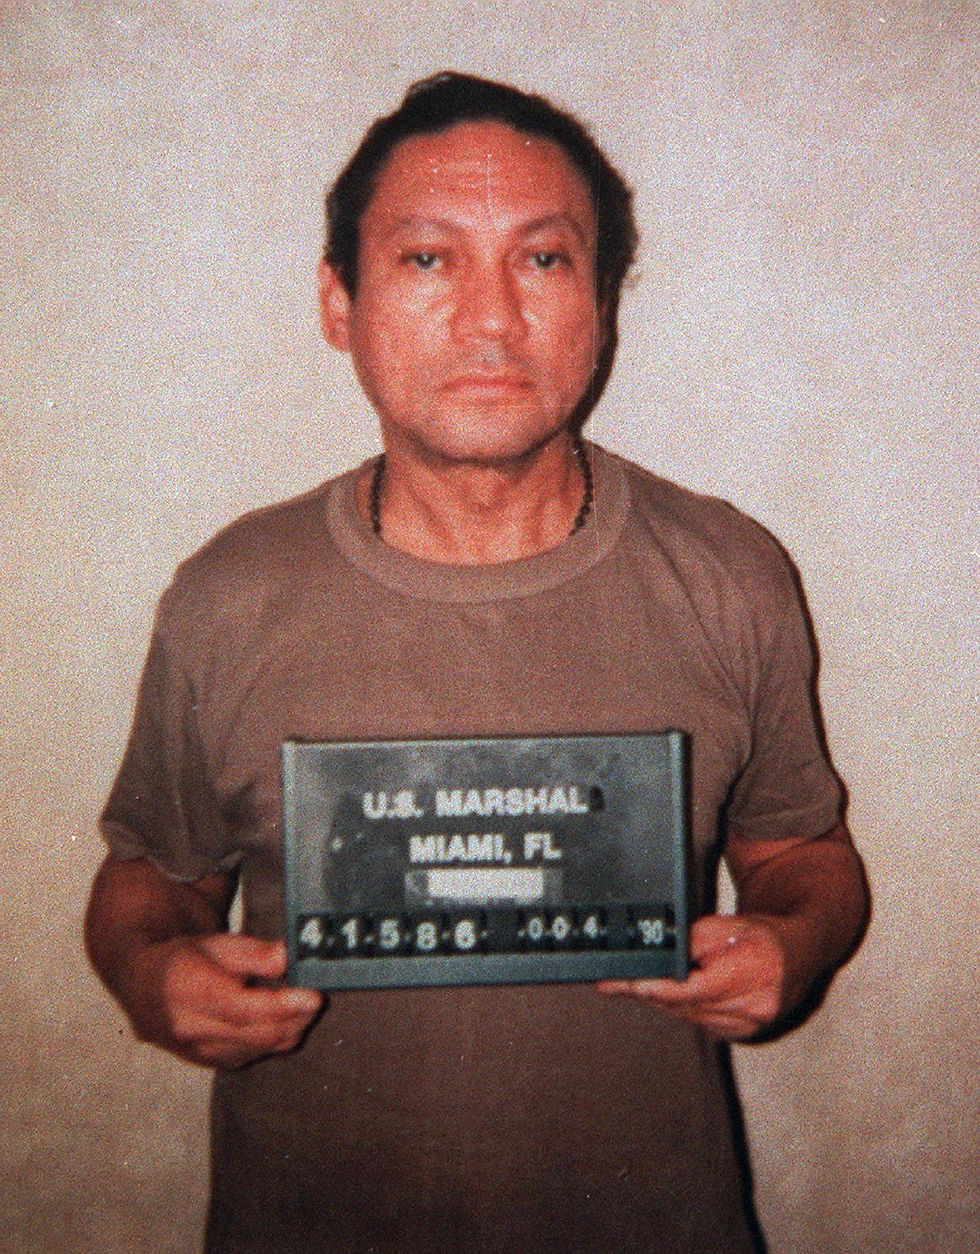 Noriega upon his arrest by the US (Photo: AP)